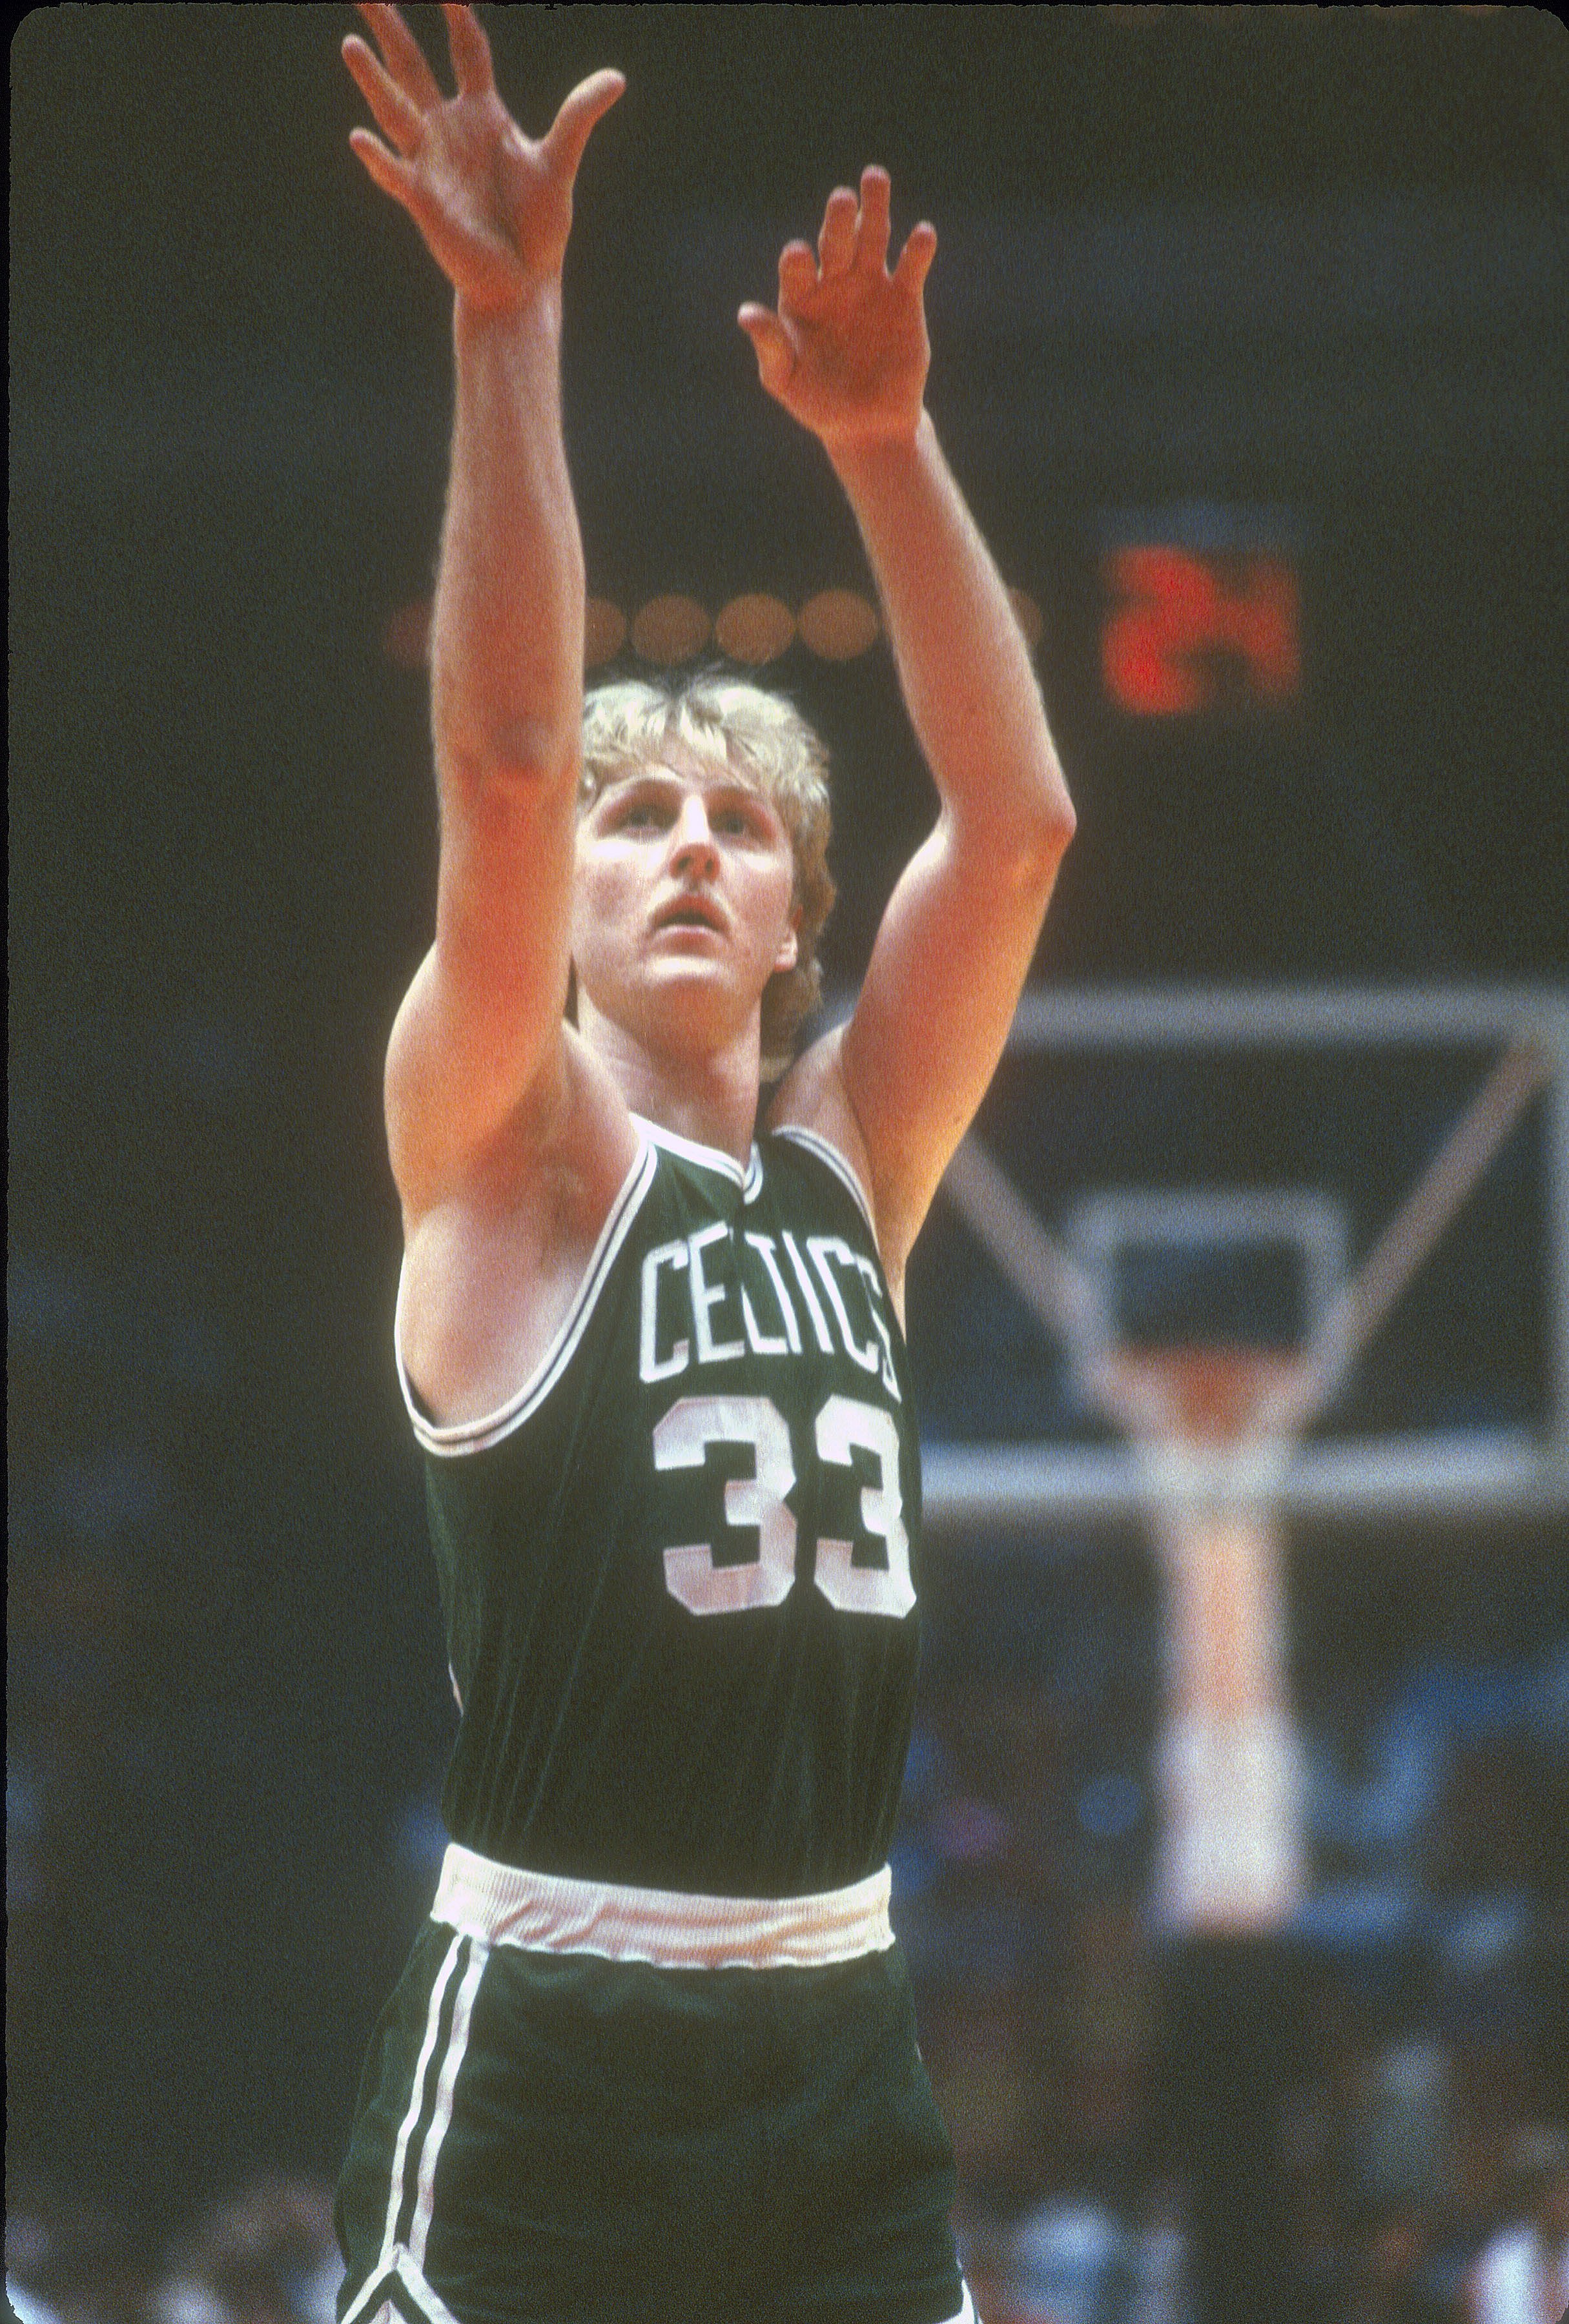 Larry Bird #33 of the Boston Celtics is photographed while shooting a foul shot against the Houston Rockets during an NBA basketball game circa 1981 at The Summit in Houston, Texas | Source: Getty Images